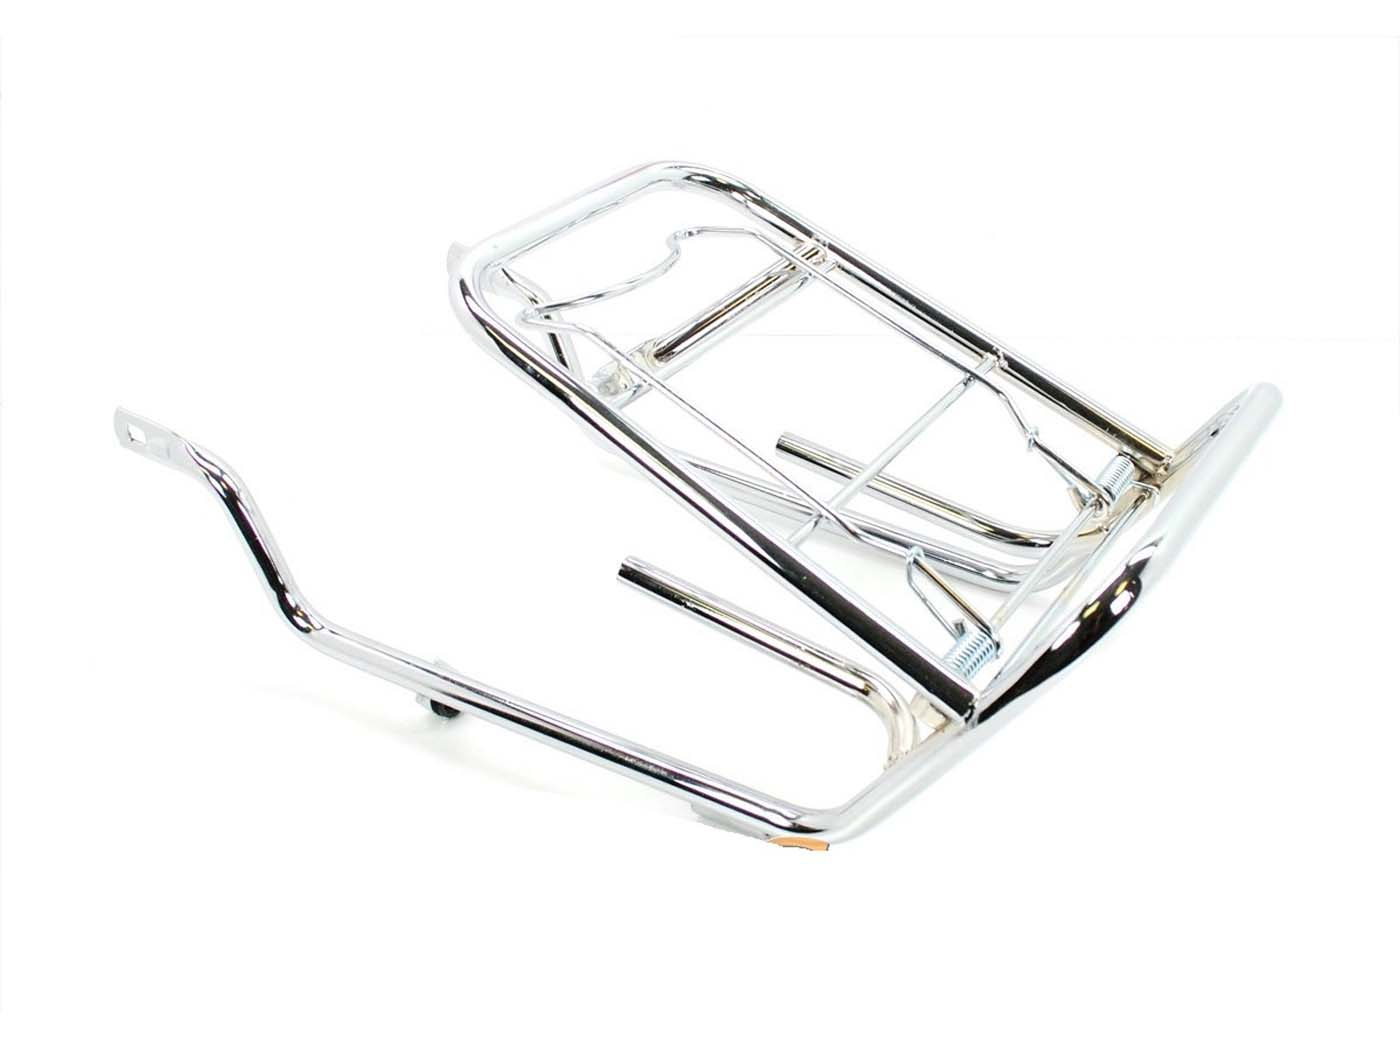 Luggage Rack Moped For Puch Monza 50